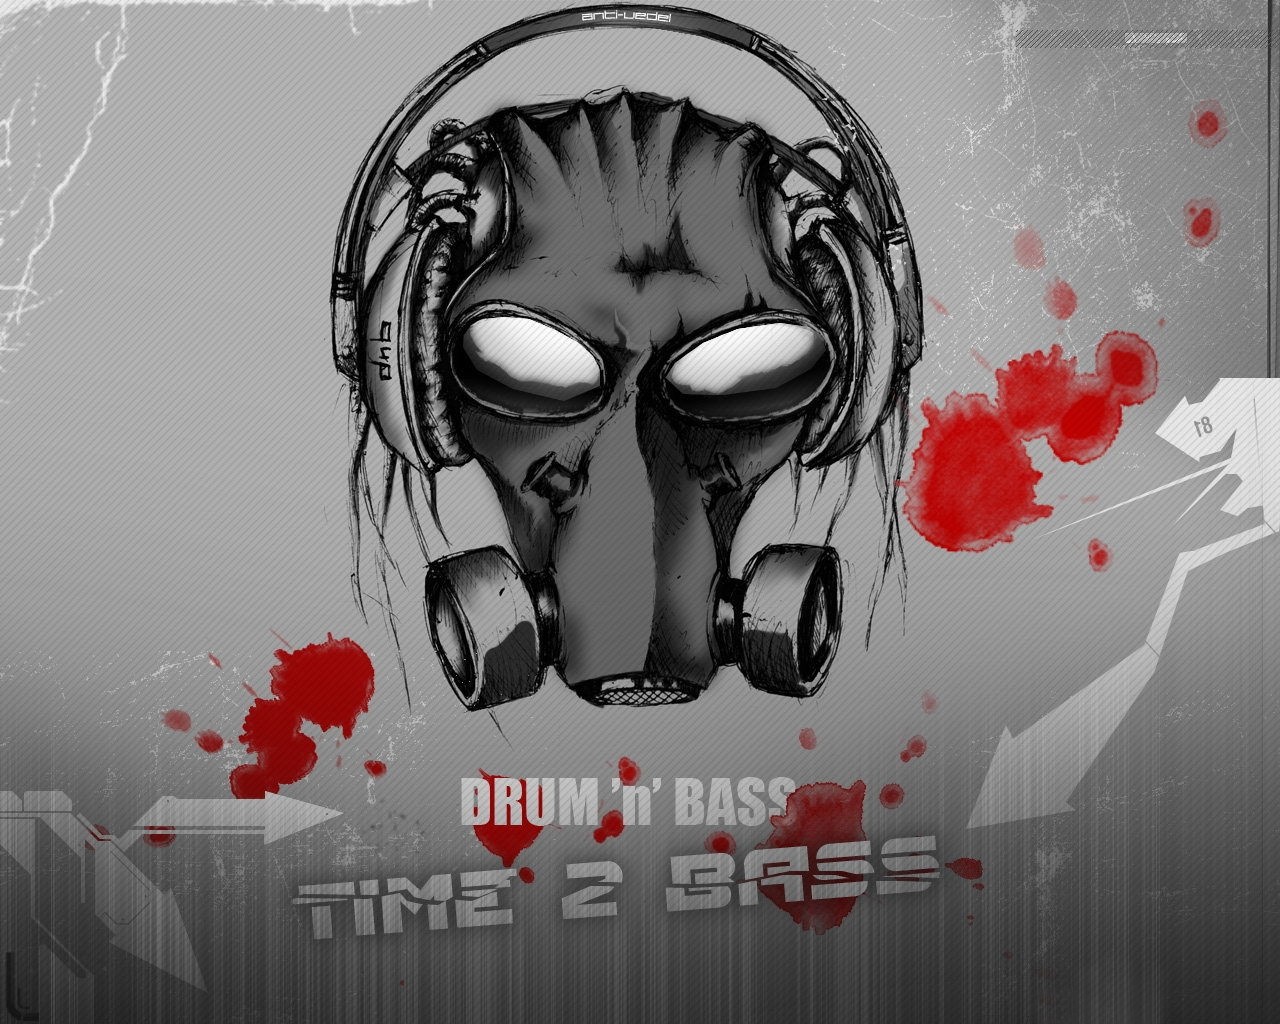 drum 39 ; and bass time to bass predator mask blood